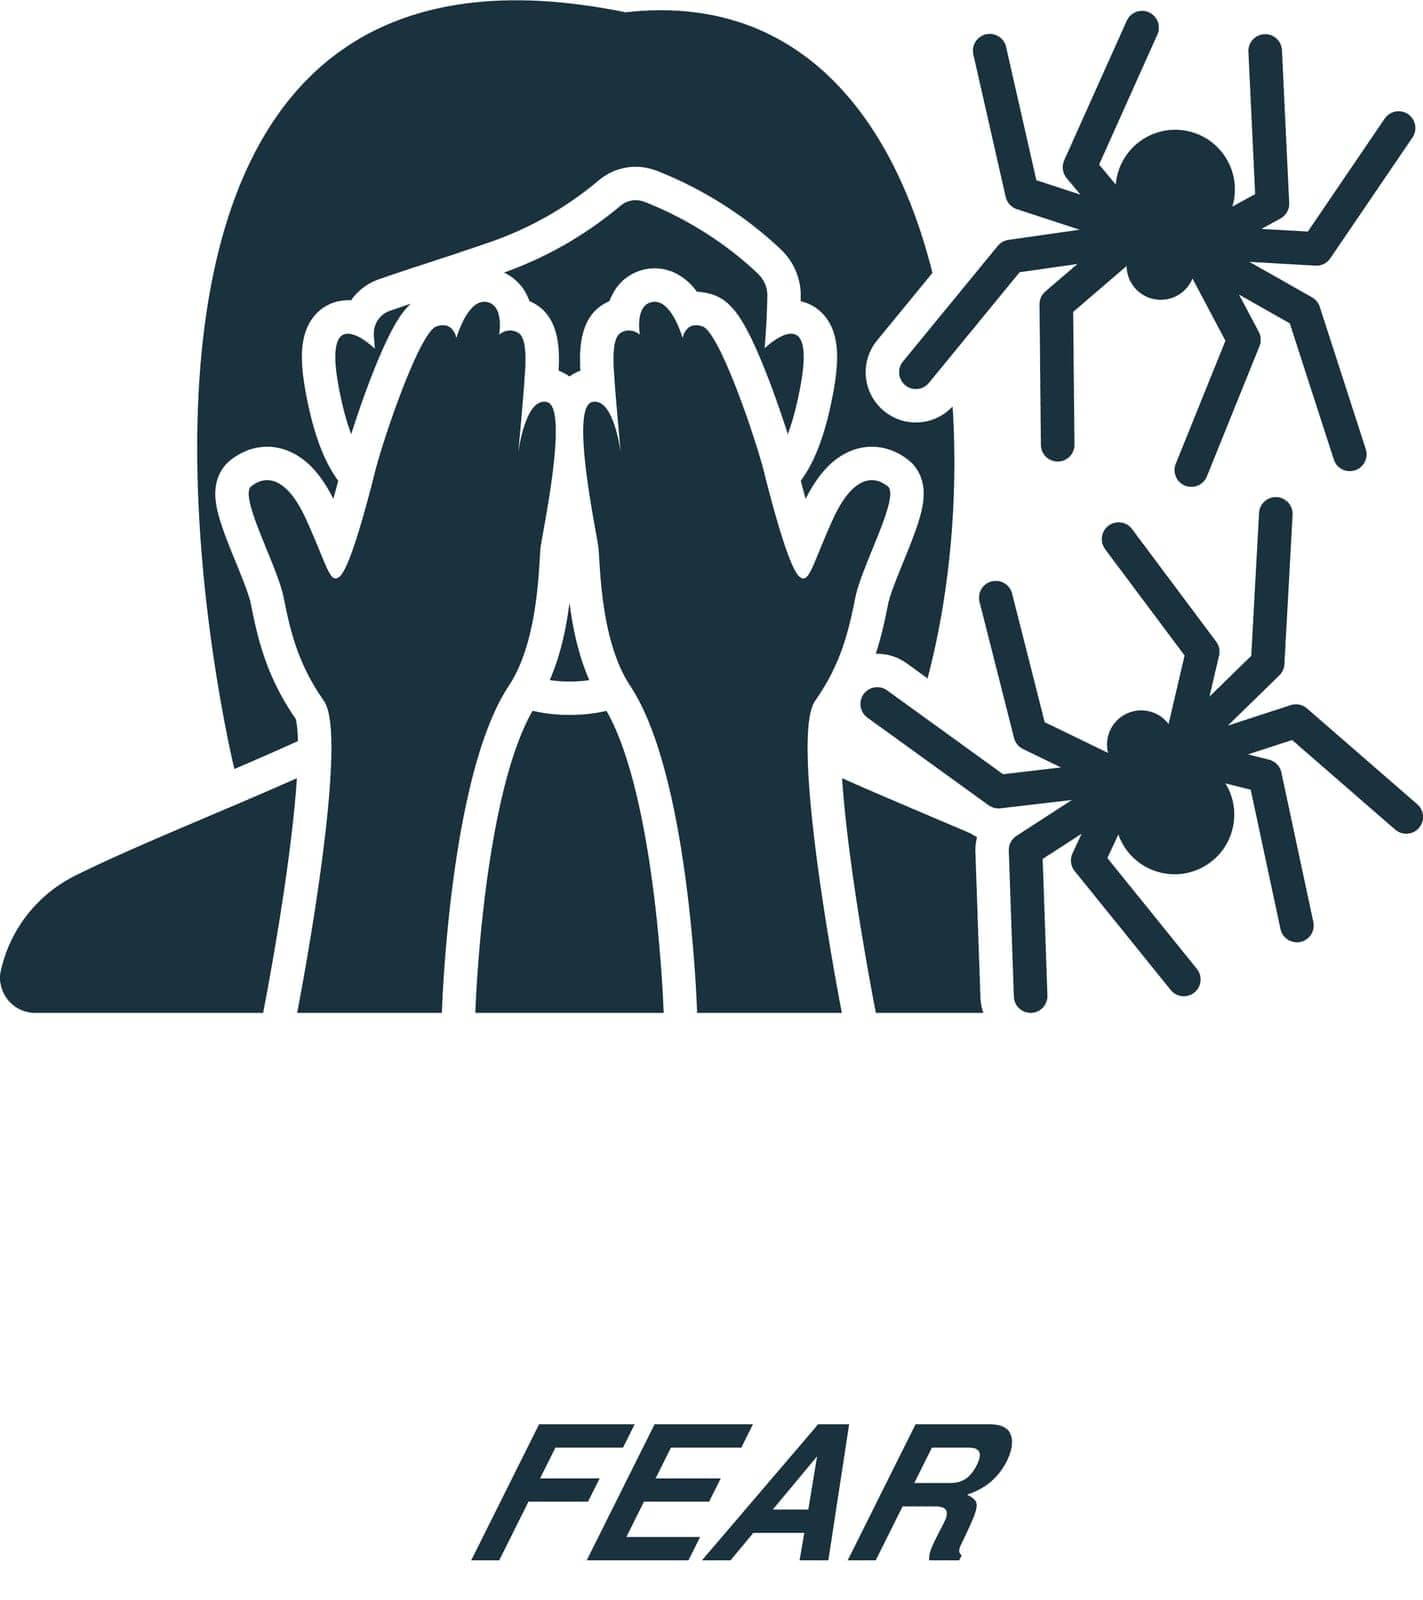 Fear icon. Monochrome simple sign from challenges collection. Fear icon for logo, templates, web design and infographics. by simakovavector